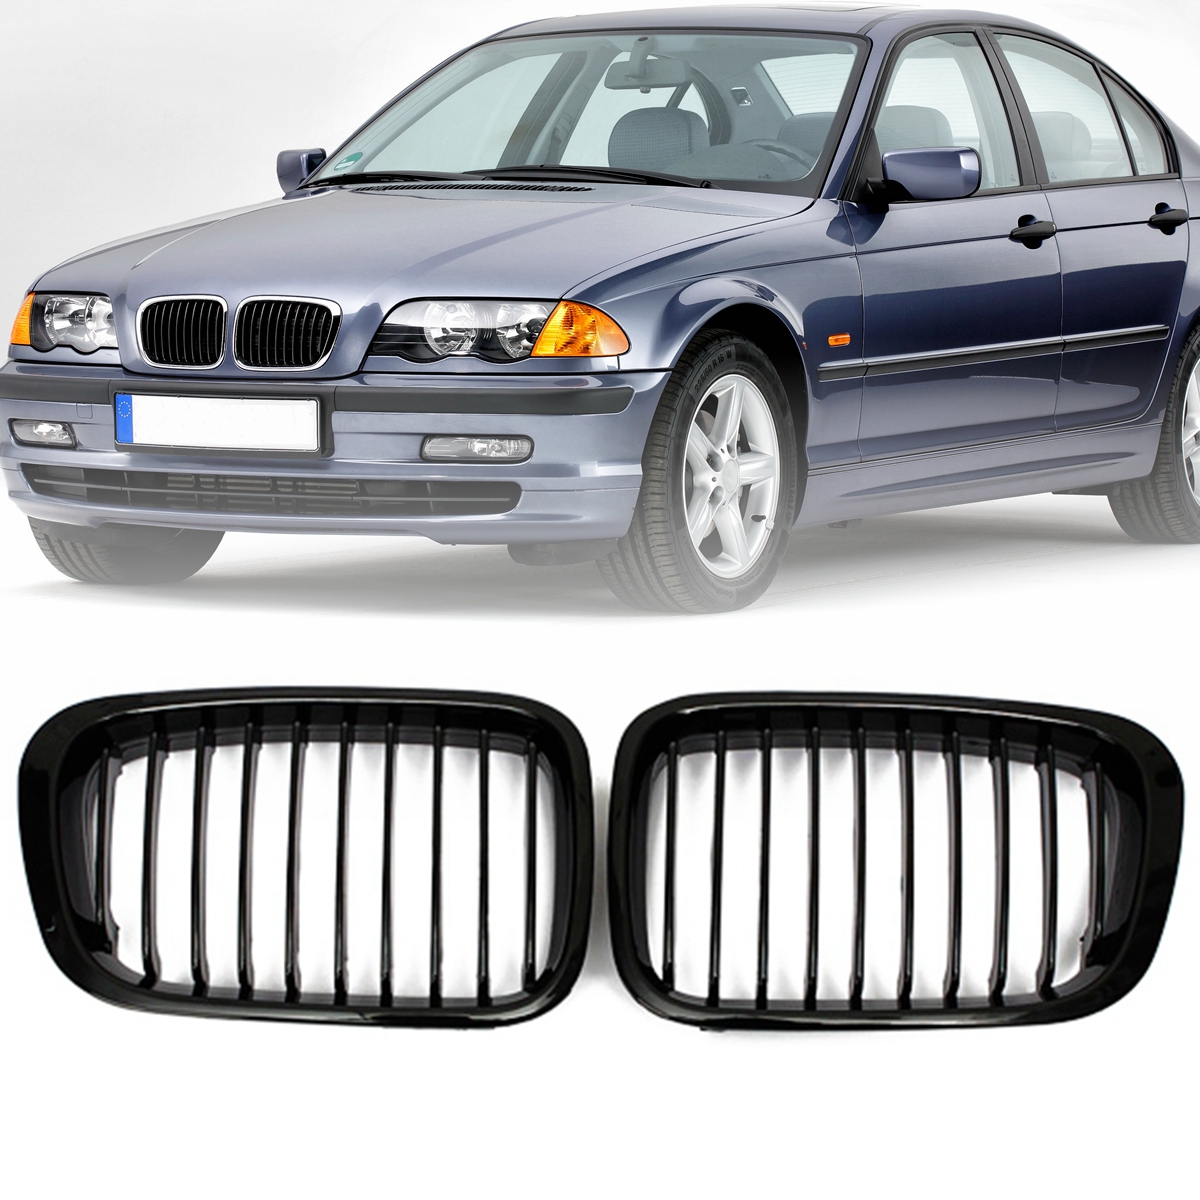 GLOSS BLACK DOUBLE RIMS KIDNEY GRILLE Grill For BMW E46 4D 3 SERIES 1999-2001 